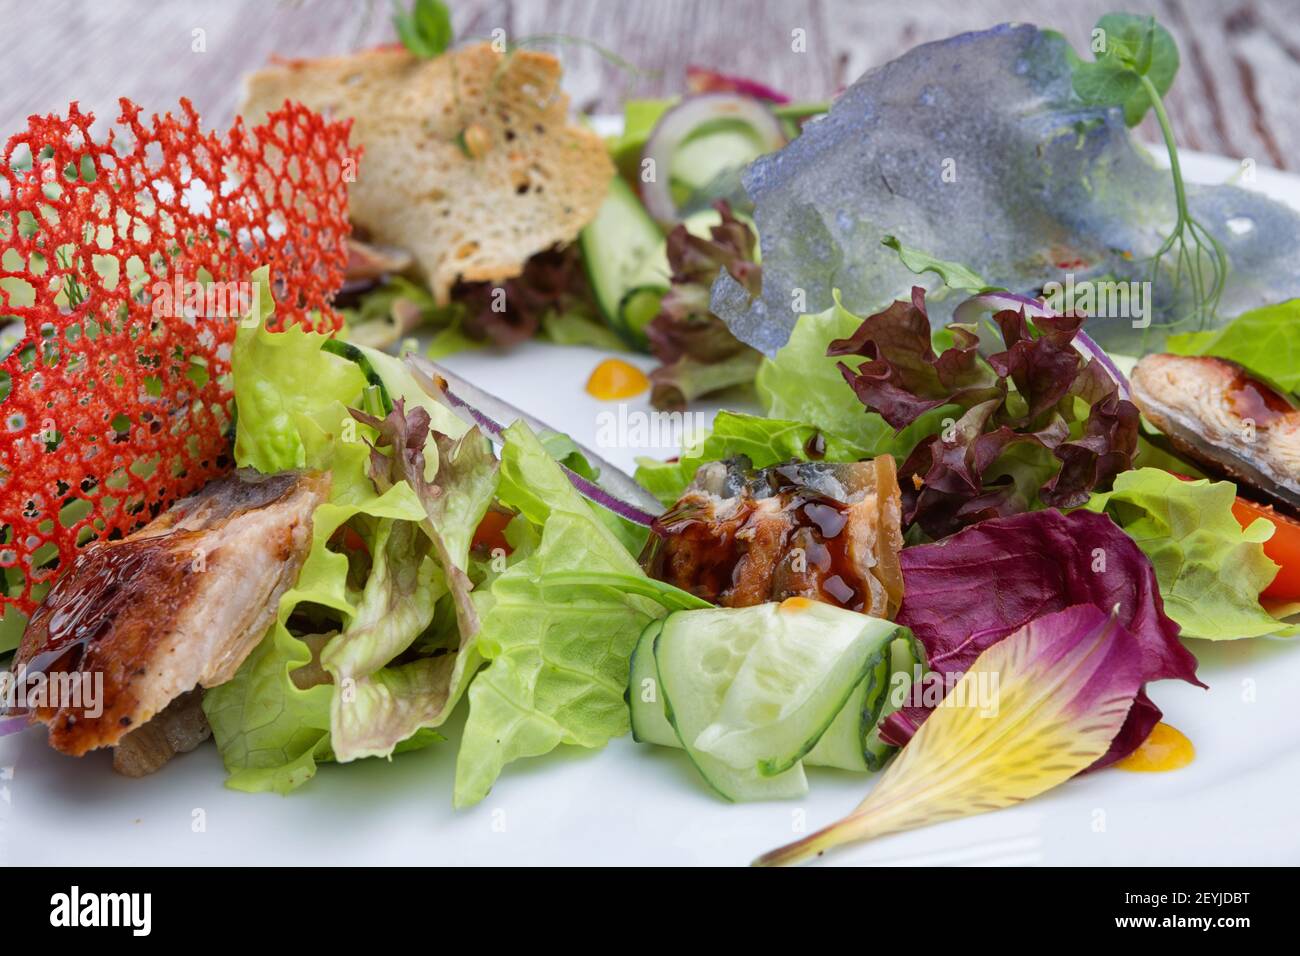 Vegetable salad with eel, on a plate Stock Photo